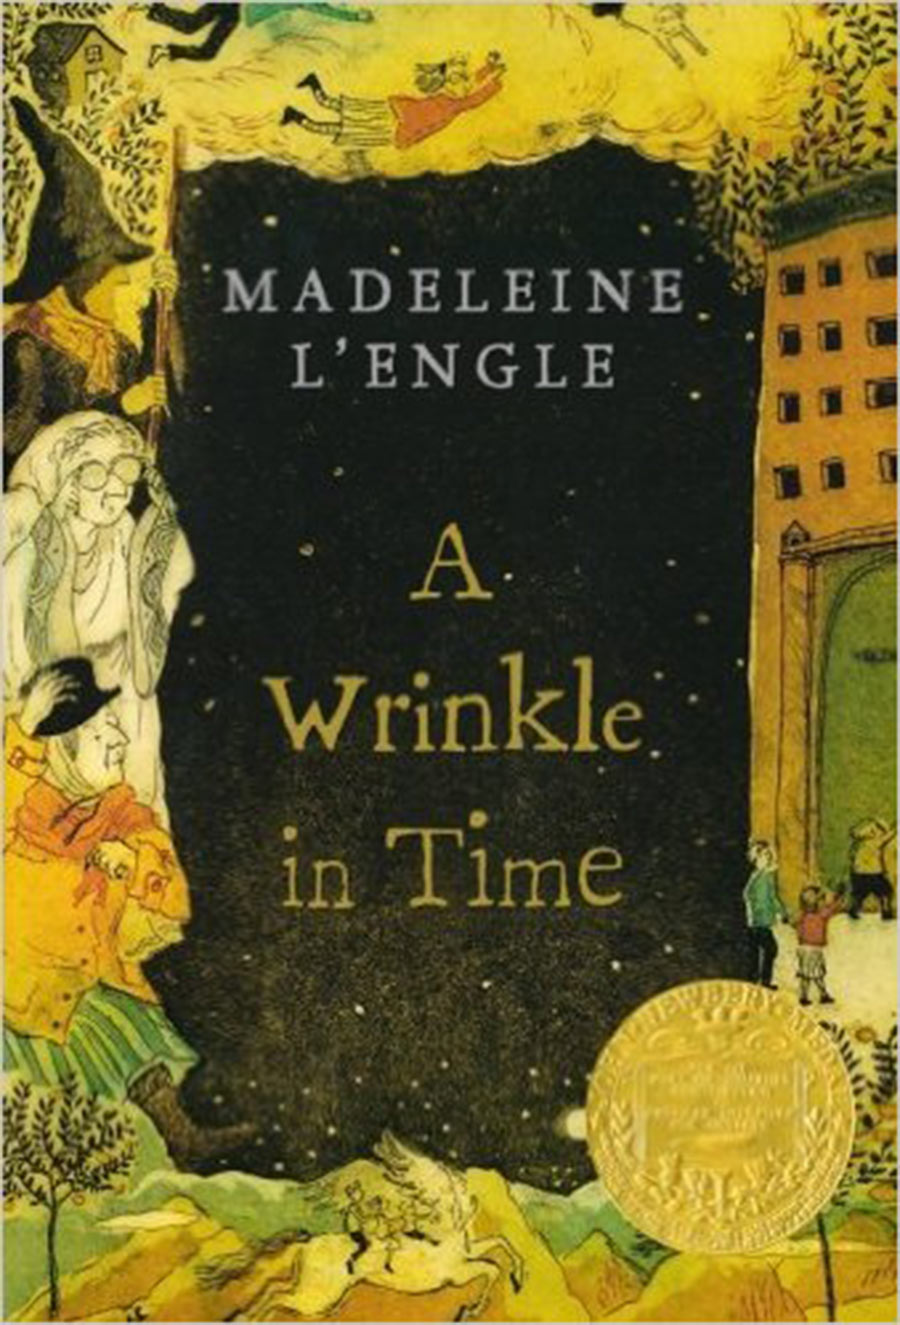 A Wrinkle in Time - The Time Quintet by Madeleine L'Engle